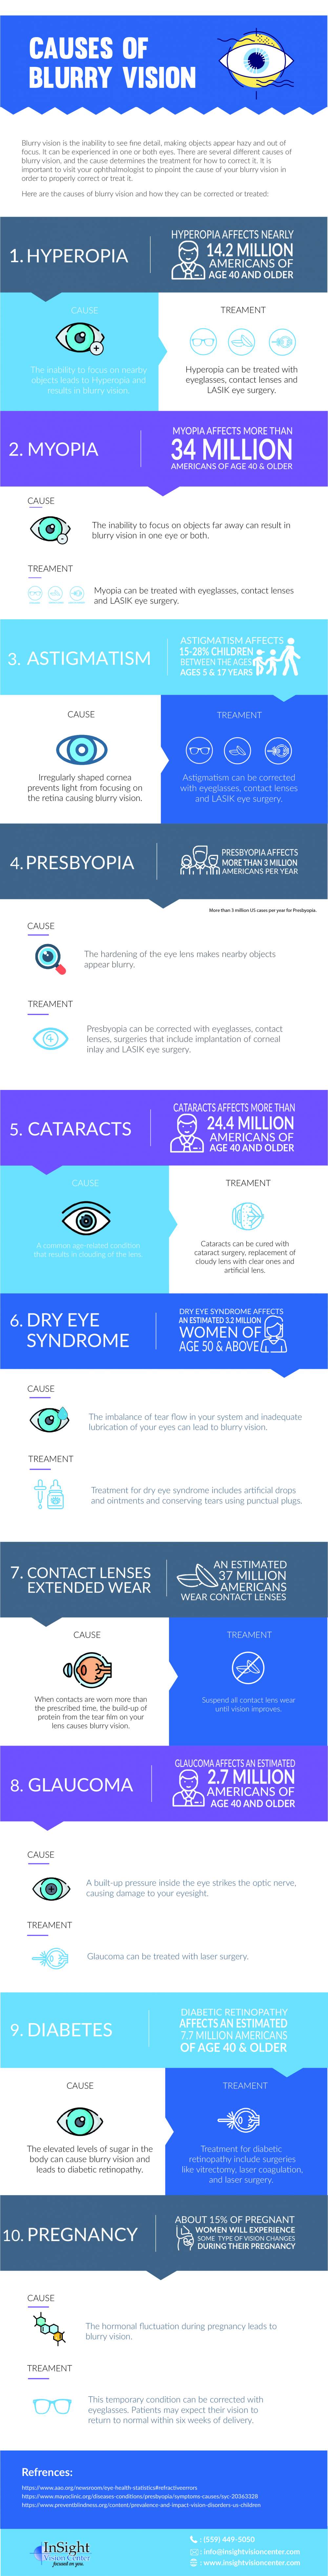 Causes of Blurry Vision